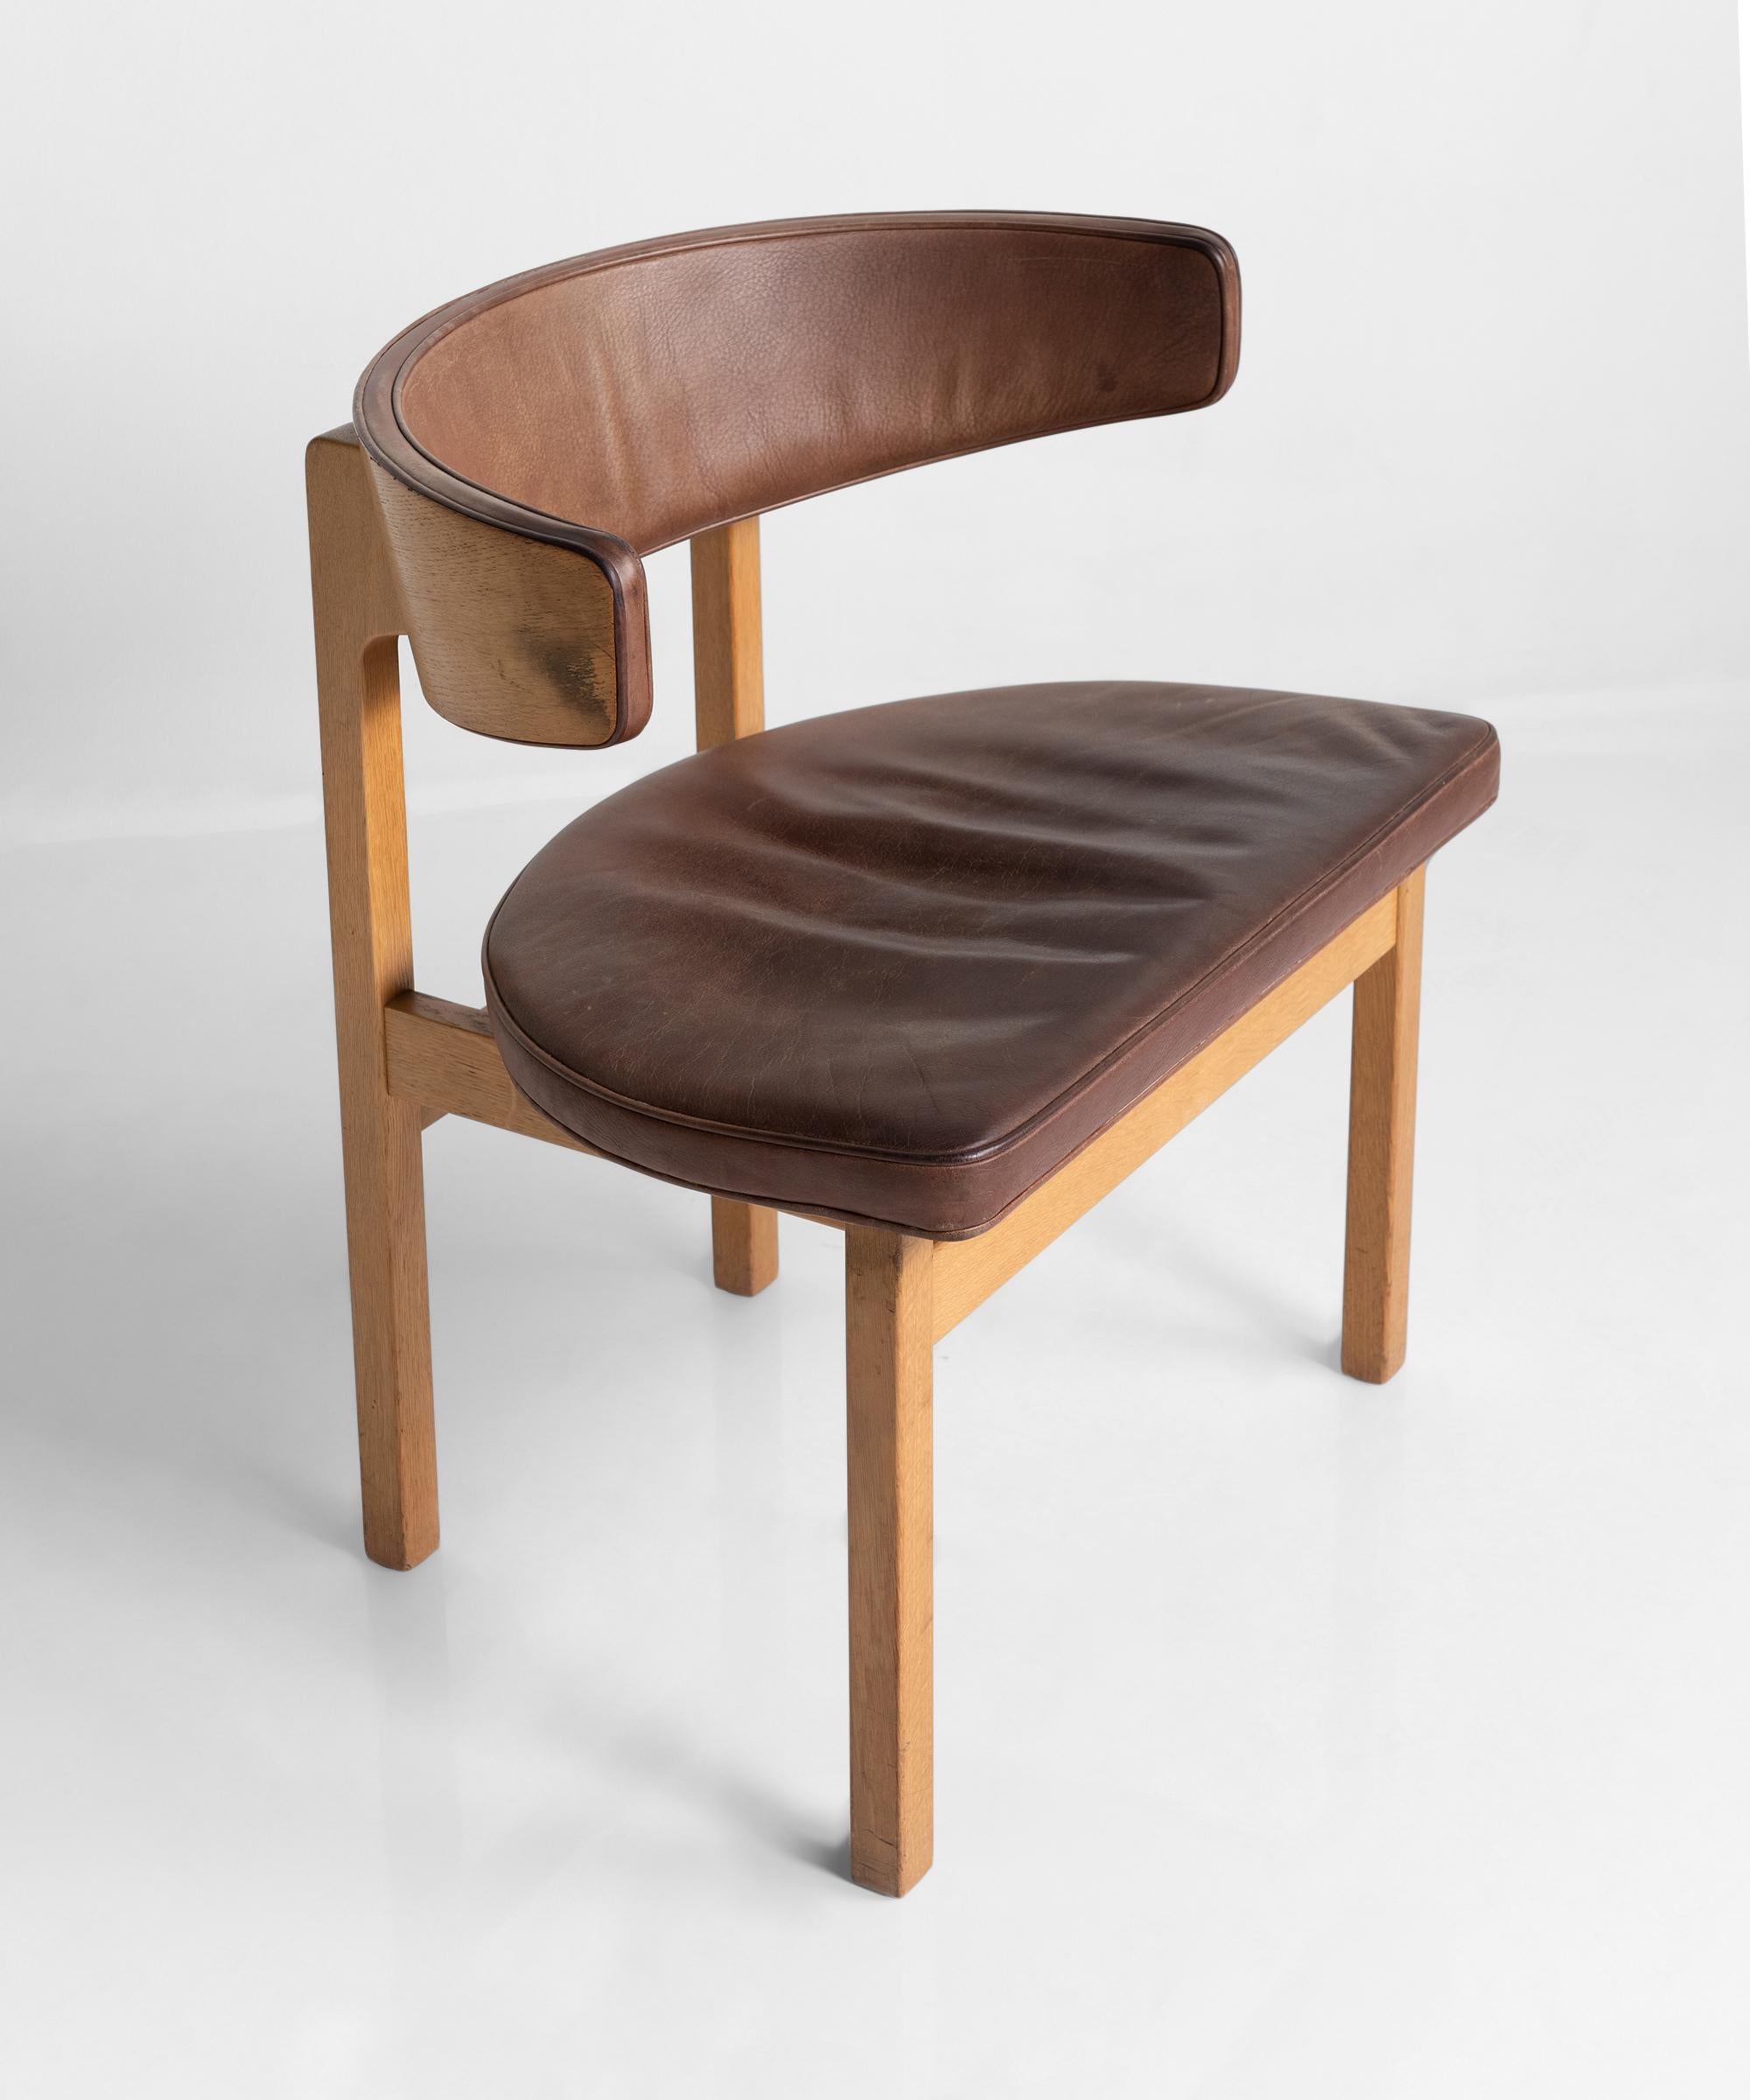 Borge Mogensen desk chair, Denmark, circa 1975.

Model 3245 desk chair with curved oak backrest and brown leather upholstery. Designed in 1975 and manufactured by Federicia Stolefabrik.